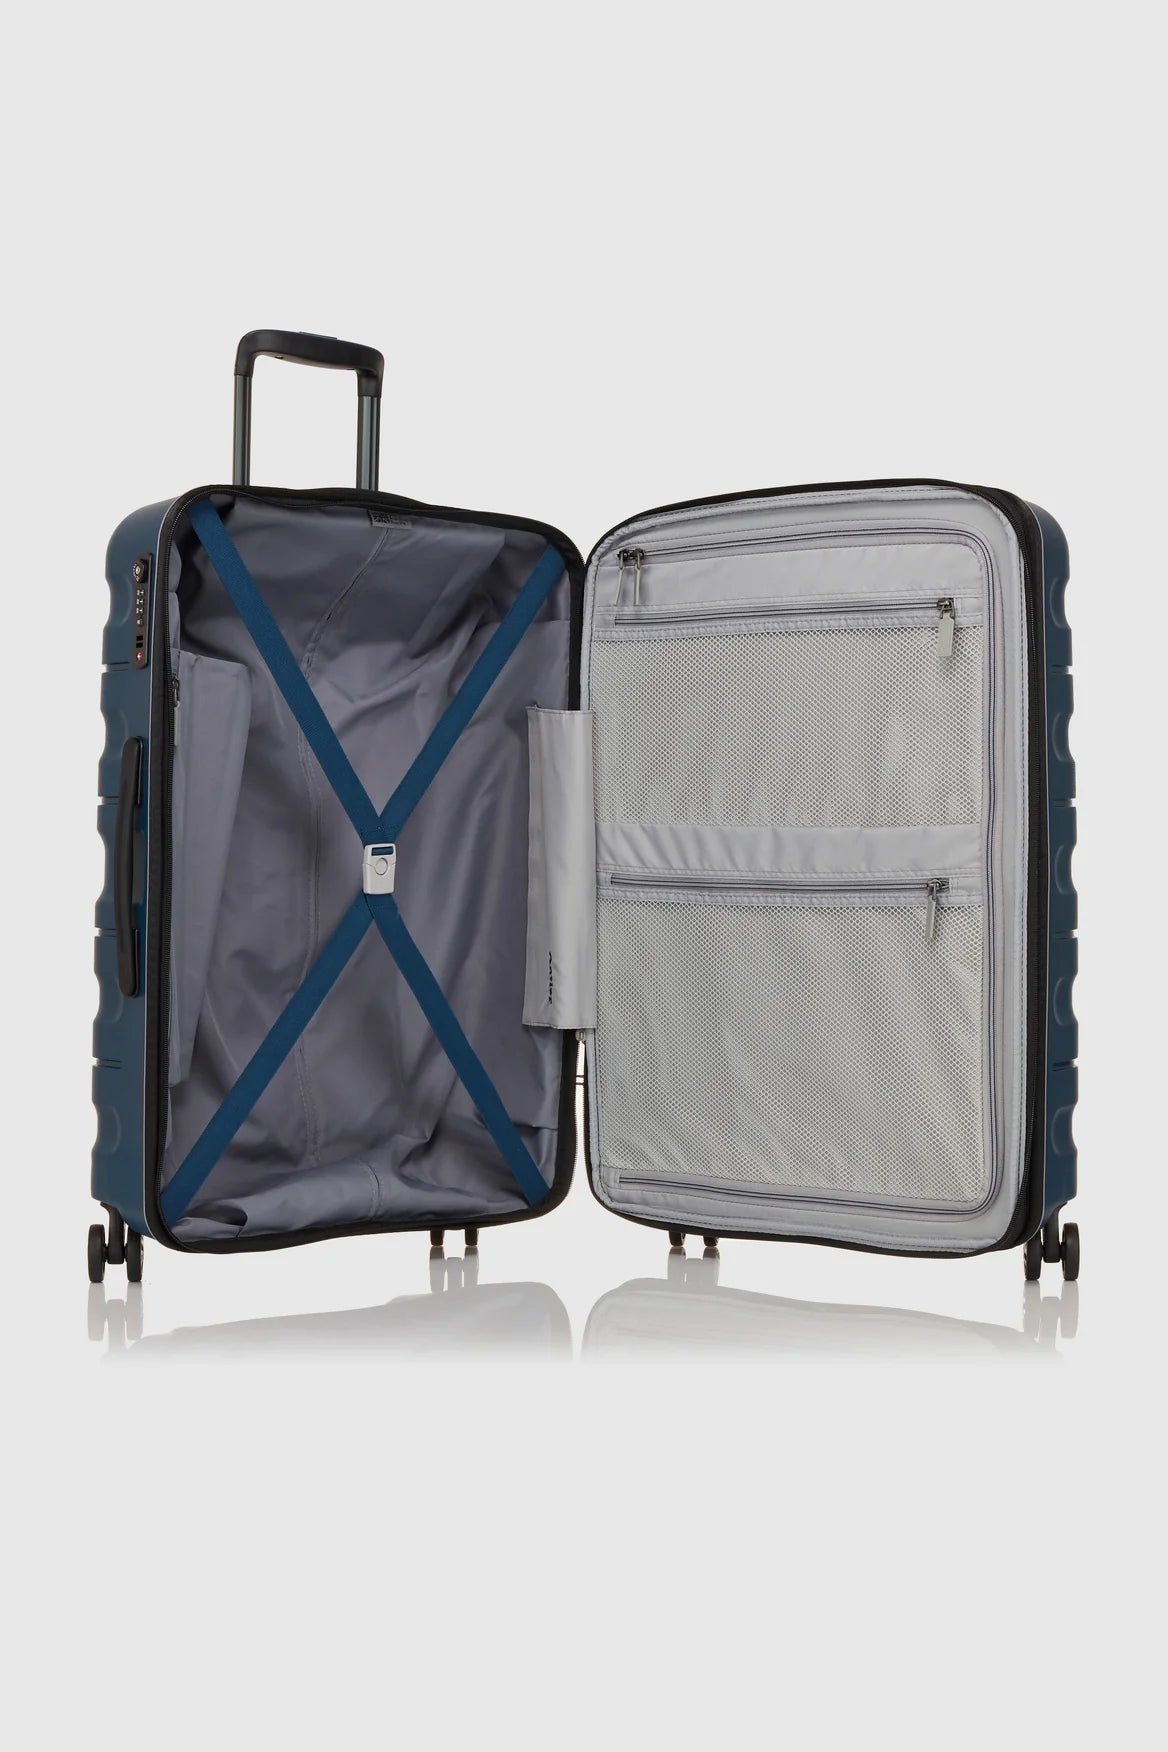 Antler - Lincoln Small 56cm Hardside 4 Wheel Suitcase - Navy - rainbowbags